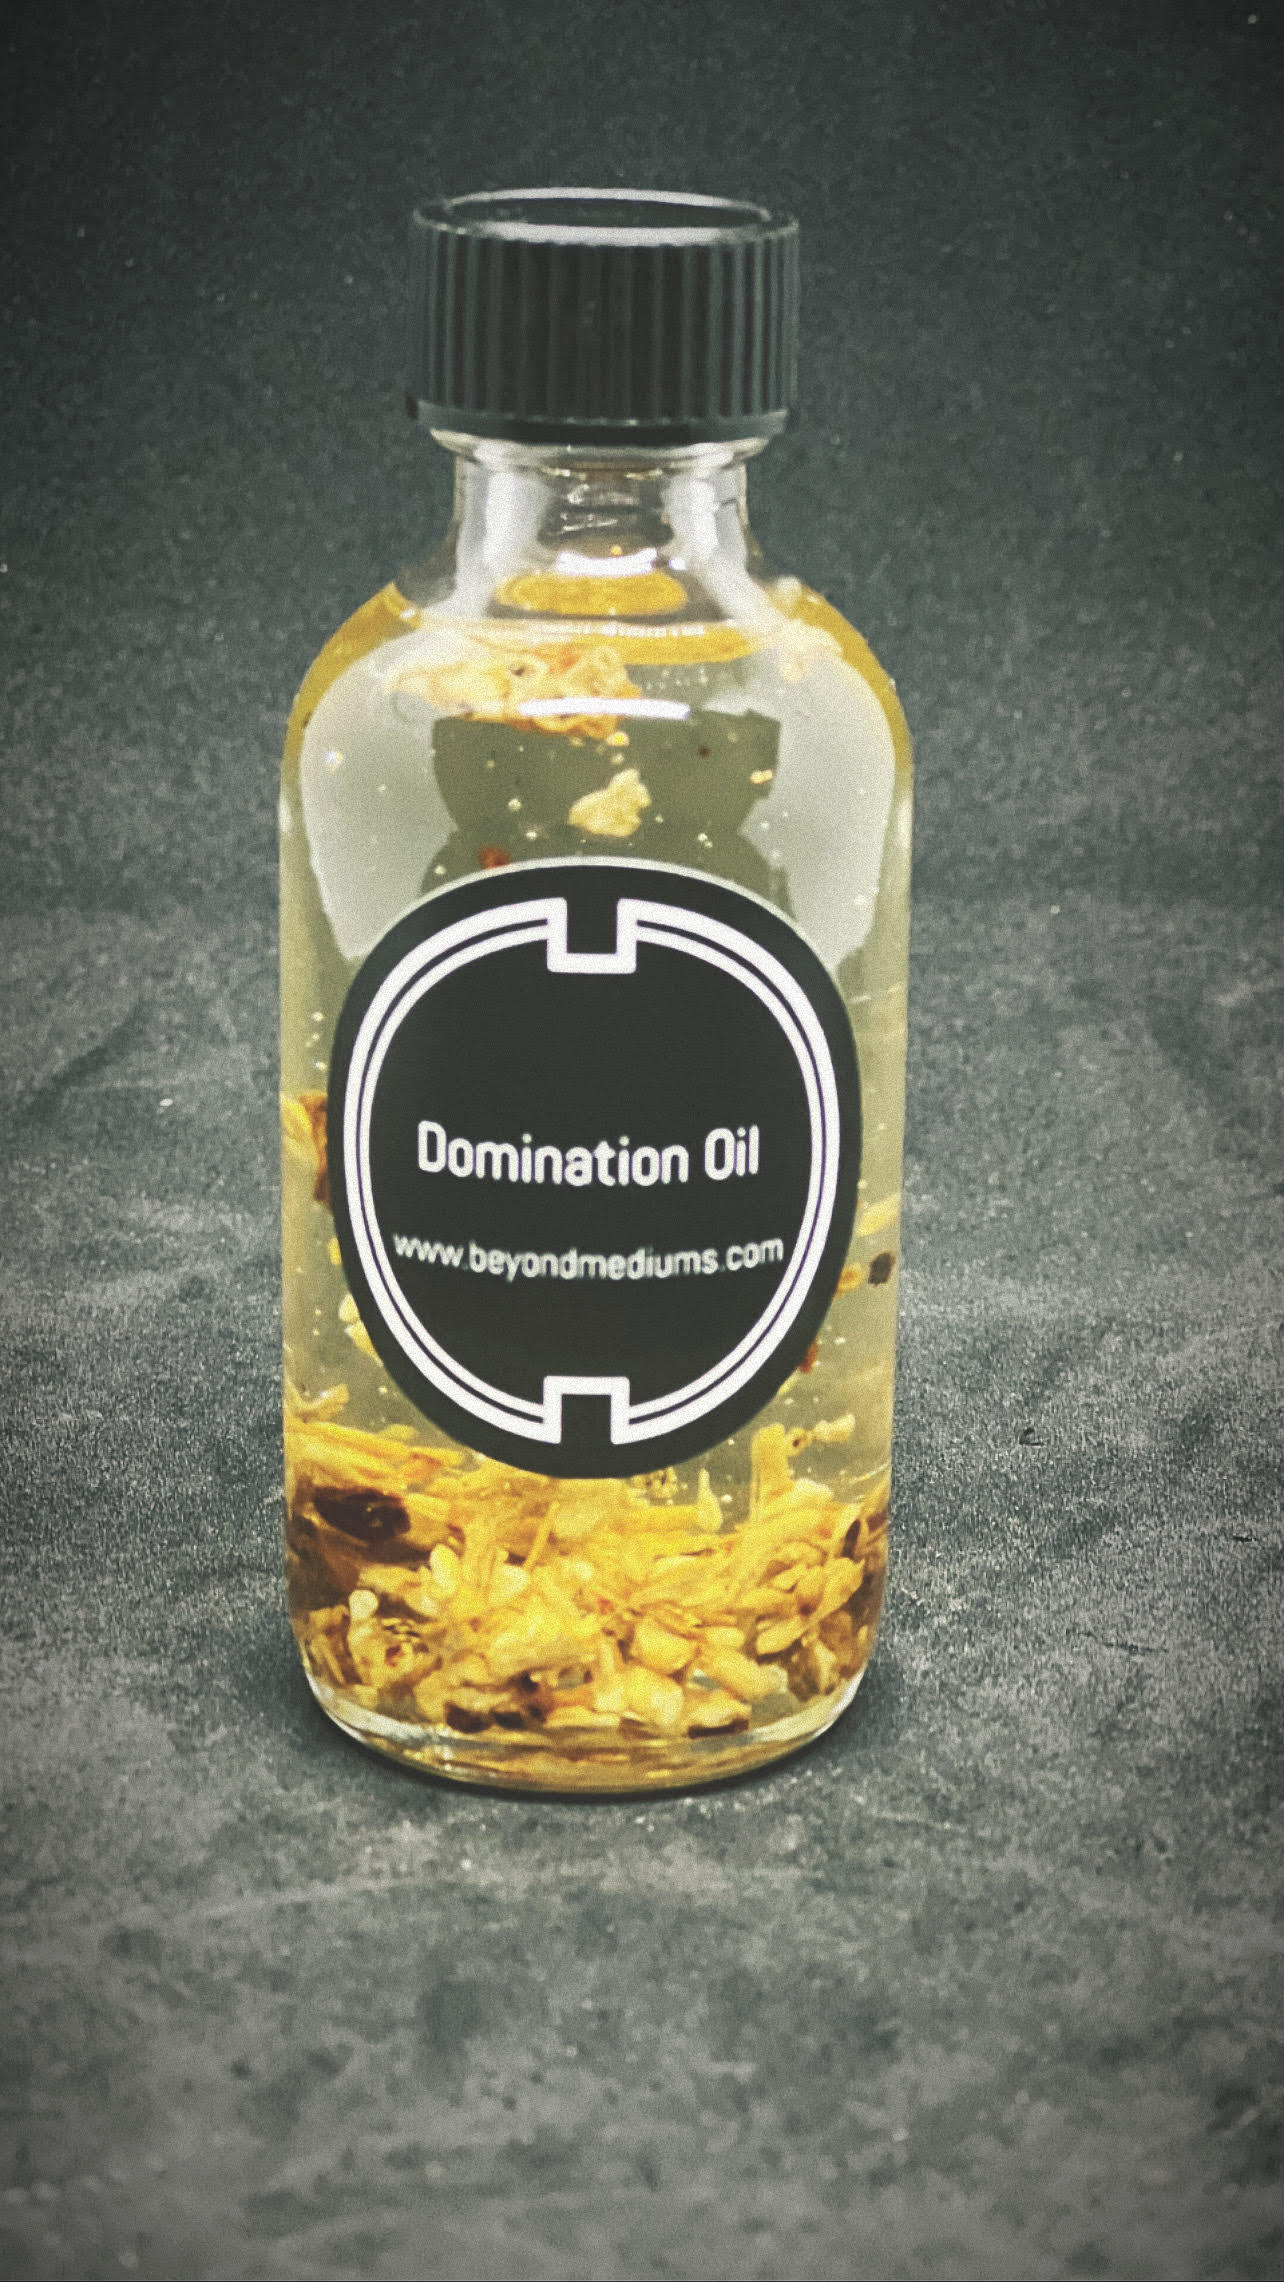 Image of Domination Oil